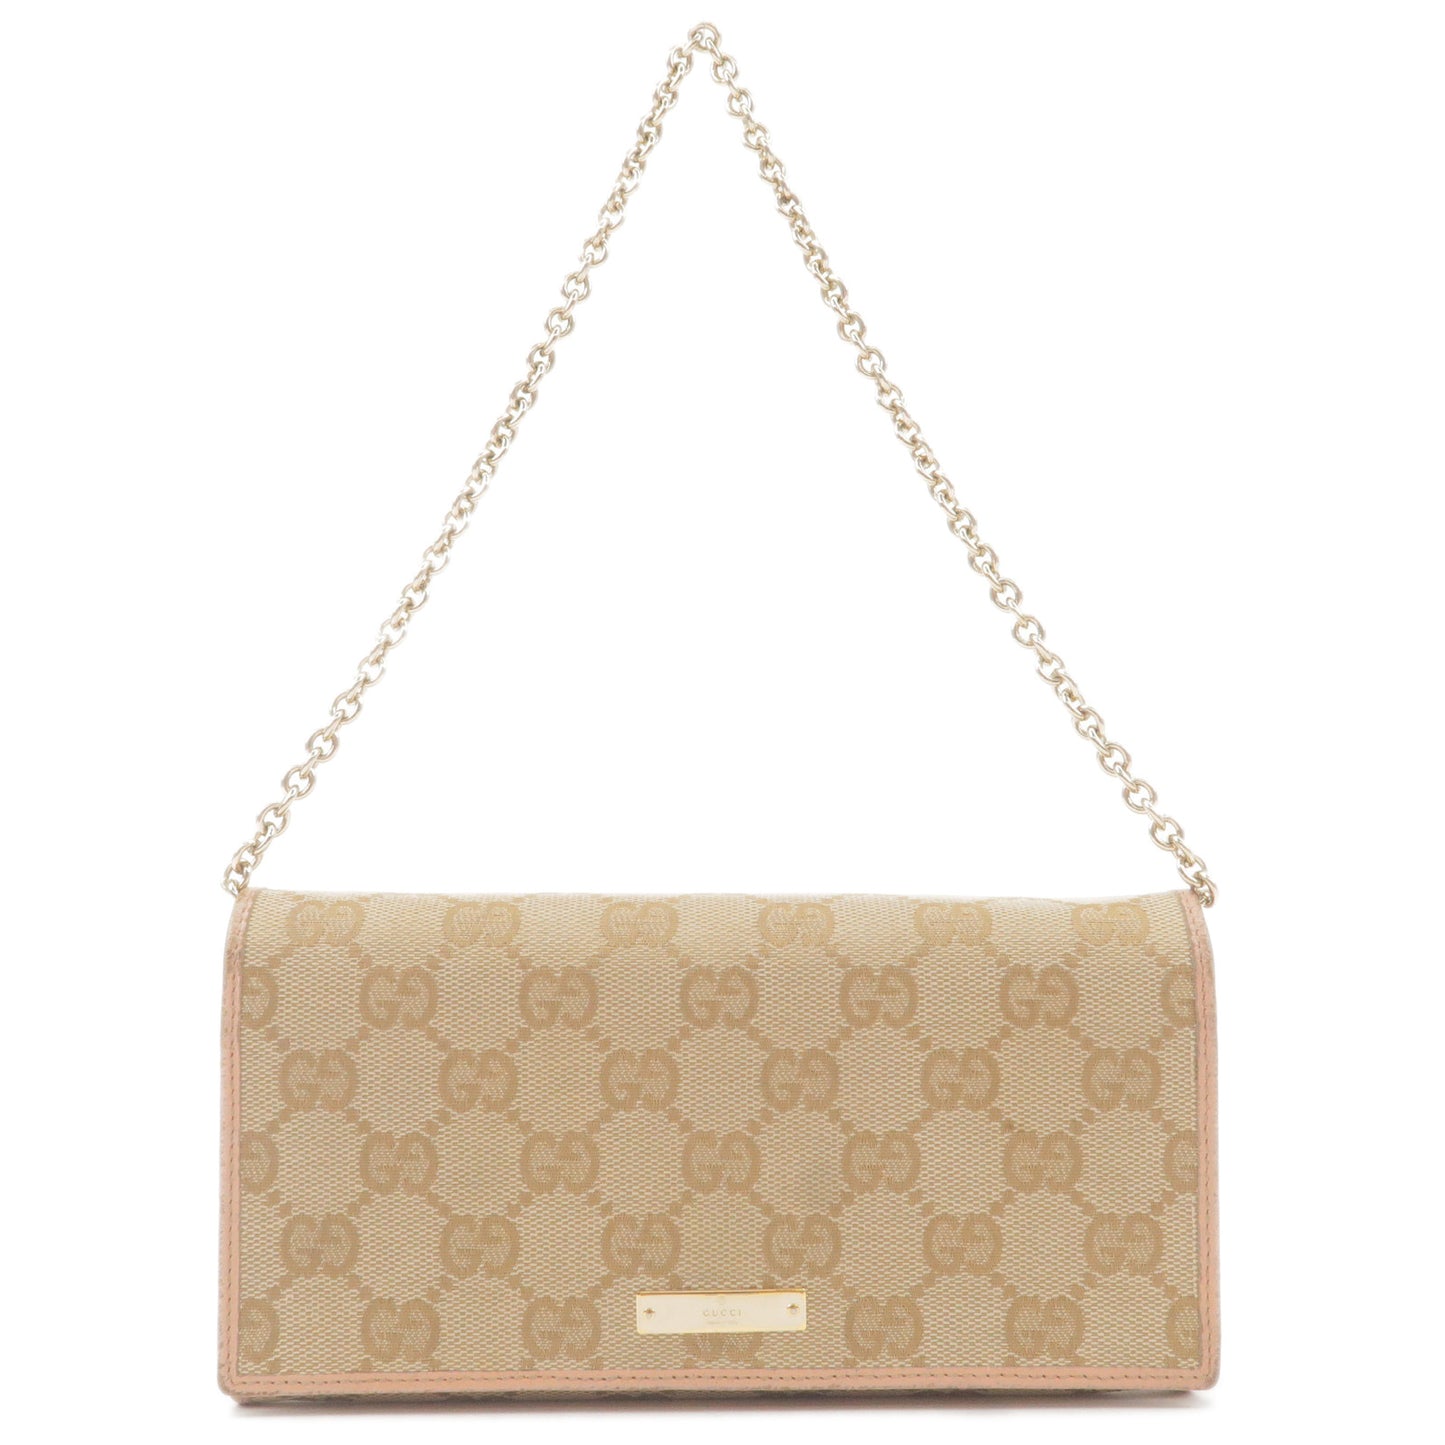 GUCCI-GG-Canvas-Leather-Chain-Wallet-WOC-Beige-Pink-1704280